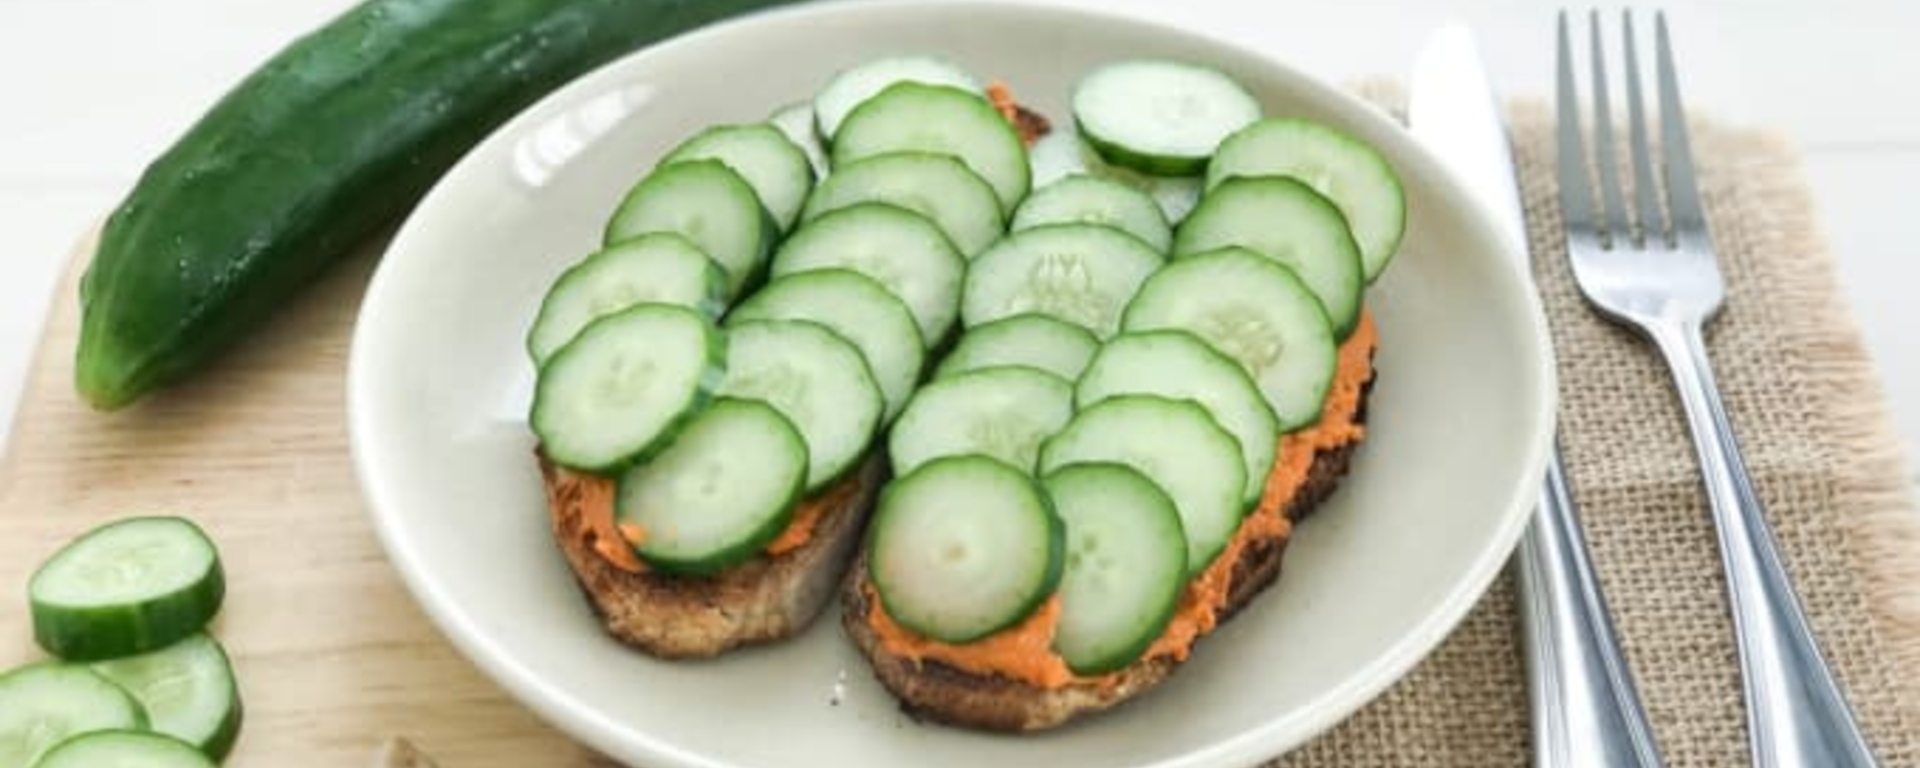 Whole Grain Bread with Hummus and Cucumber